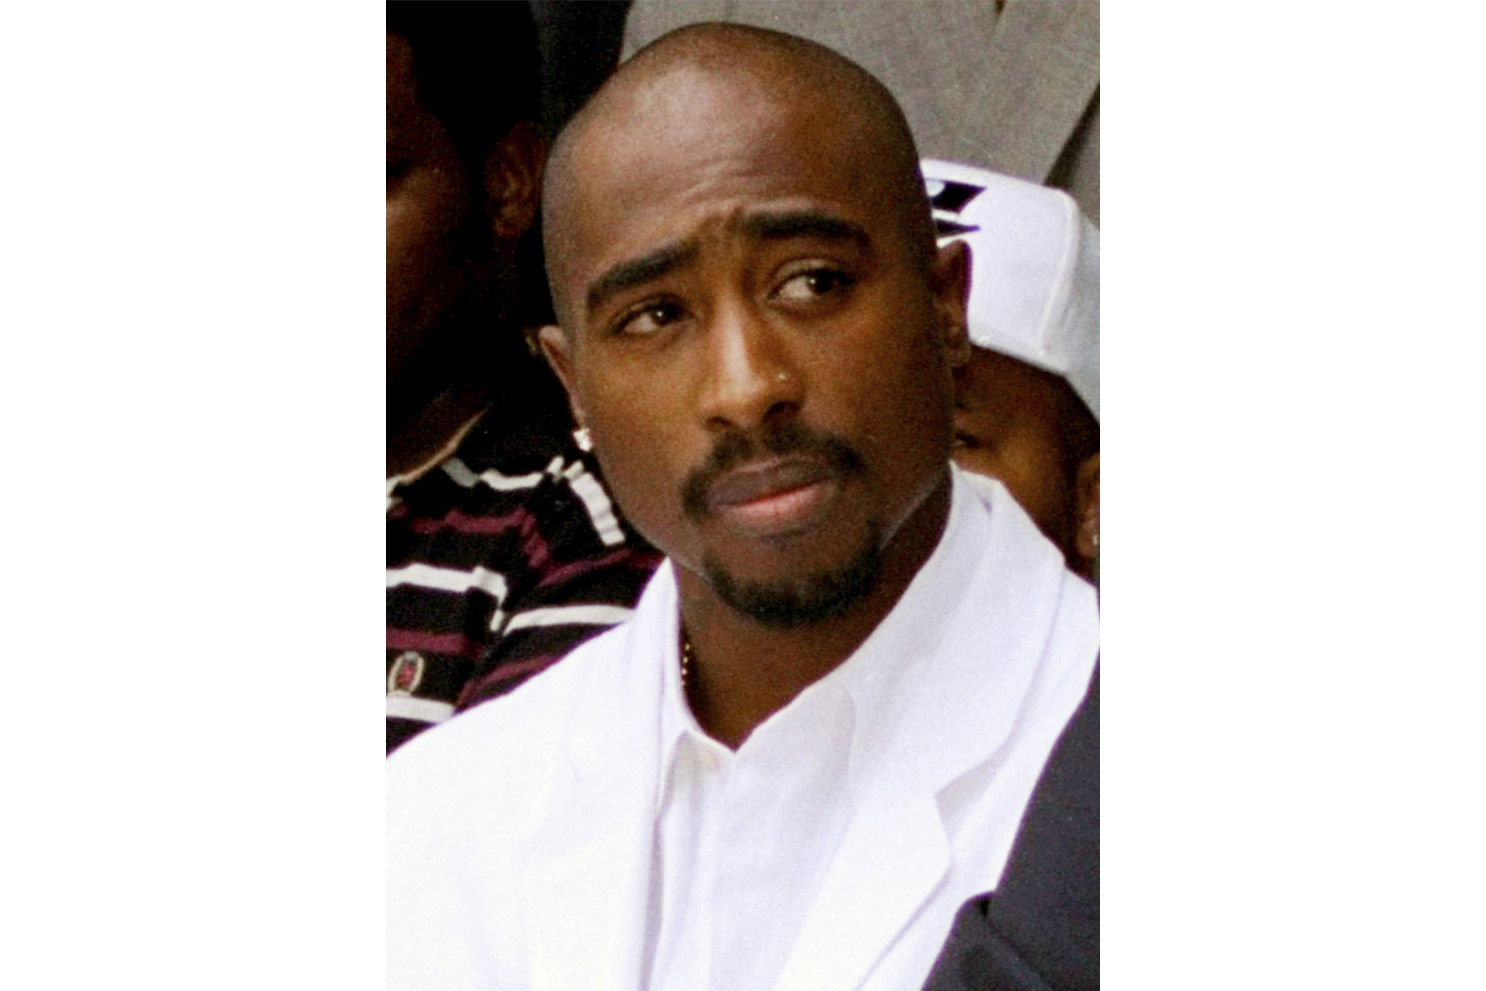 Las Vegas police confirms they served a search warrant this week in connection with the long-unsolved killing of Tupac Shakur